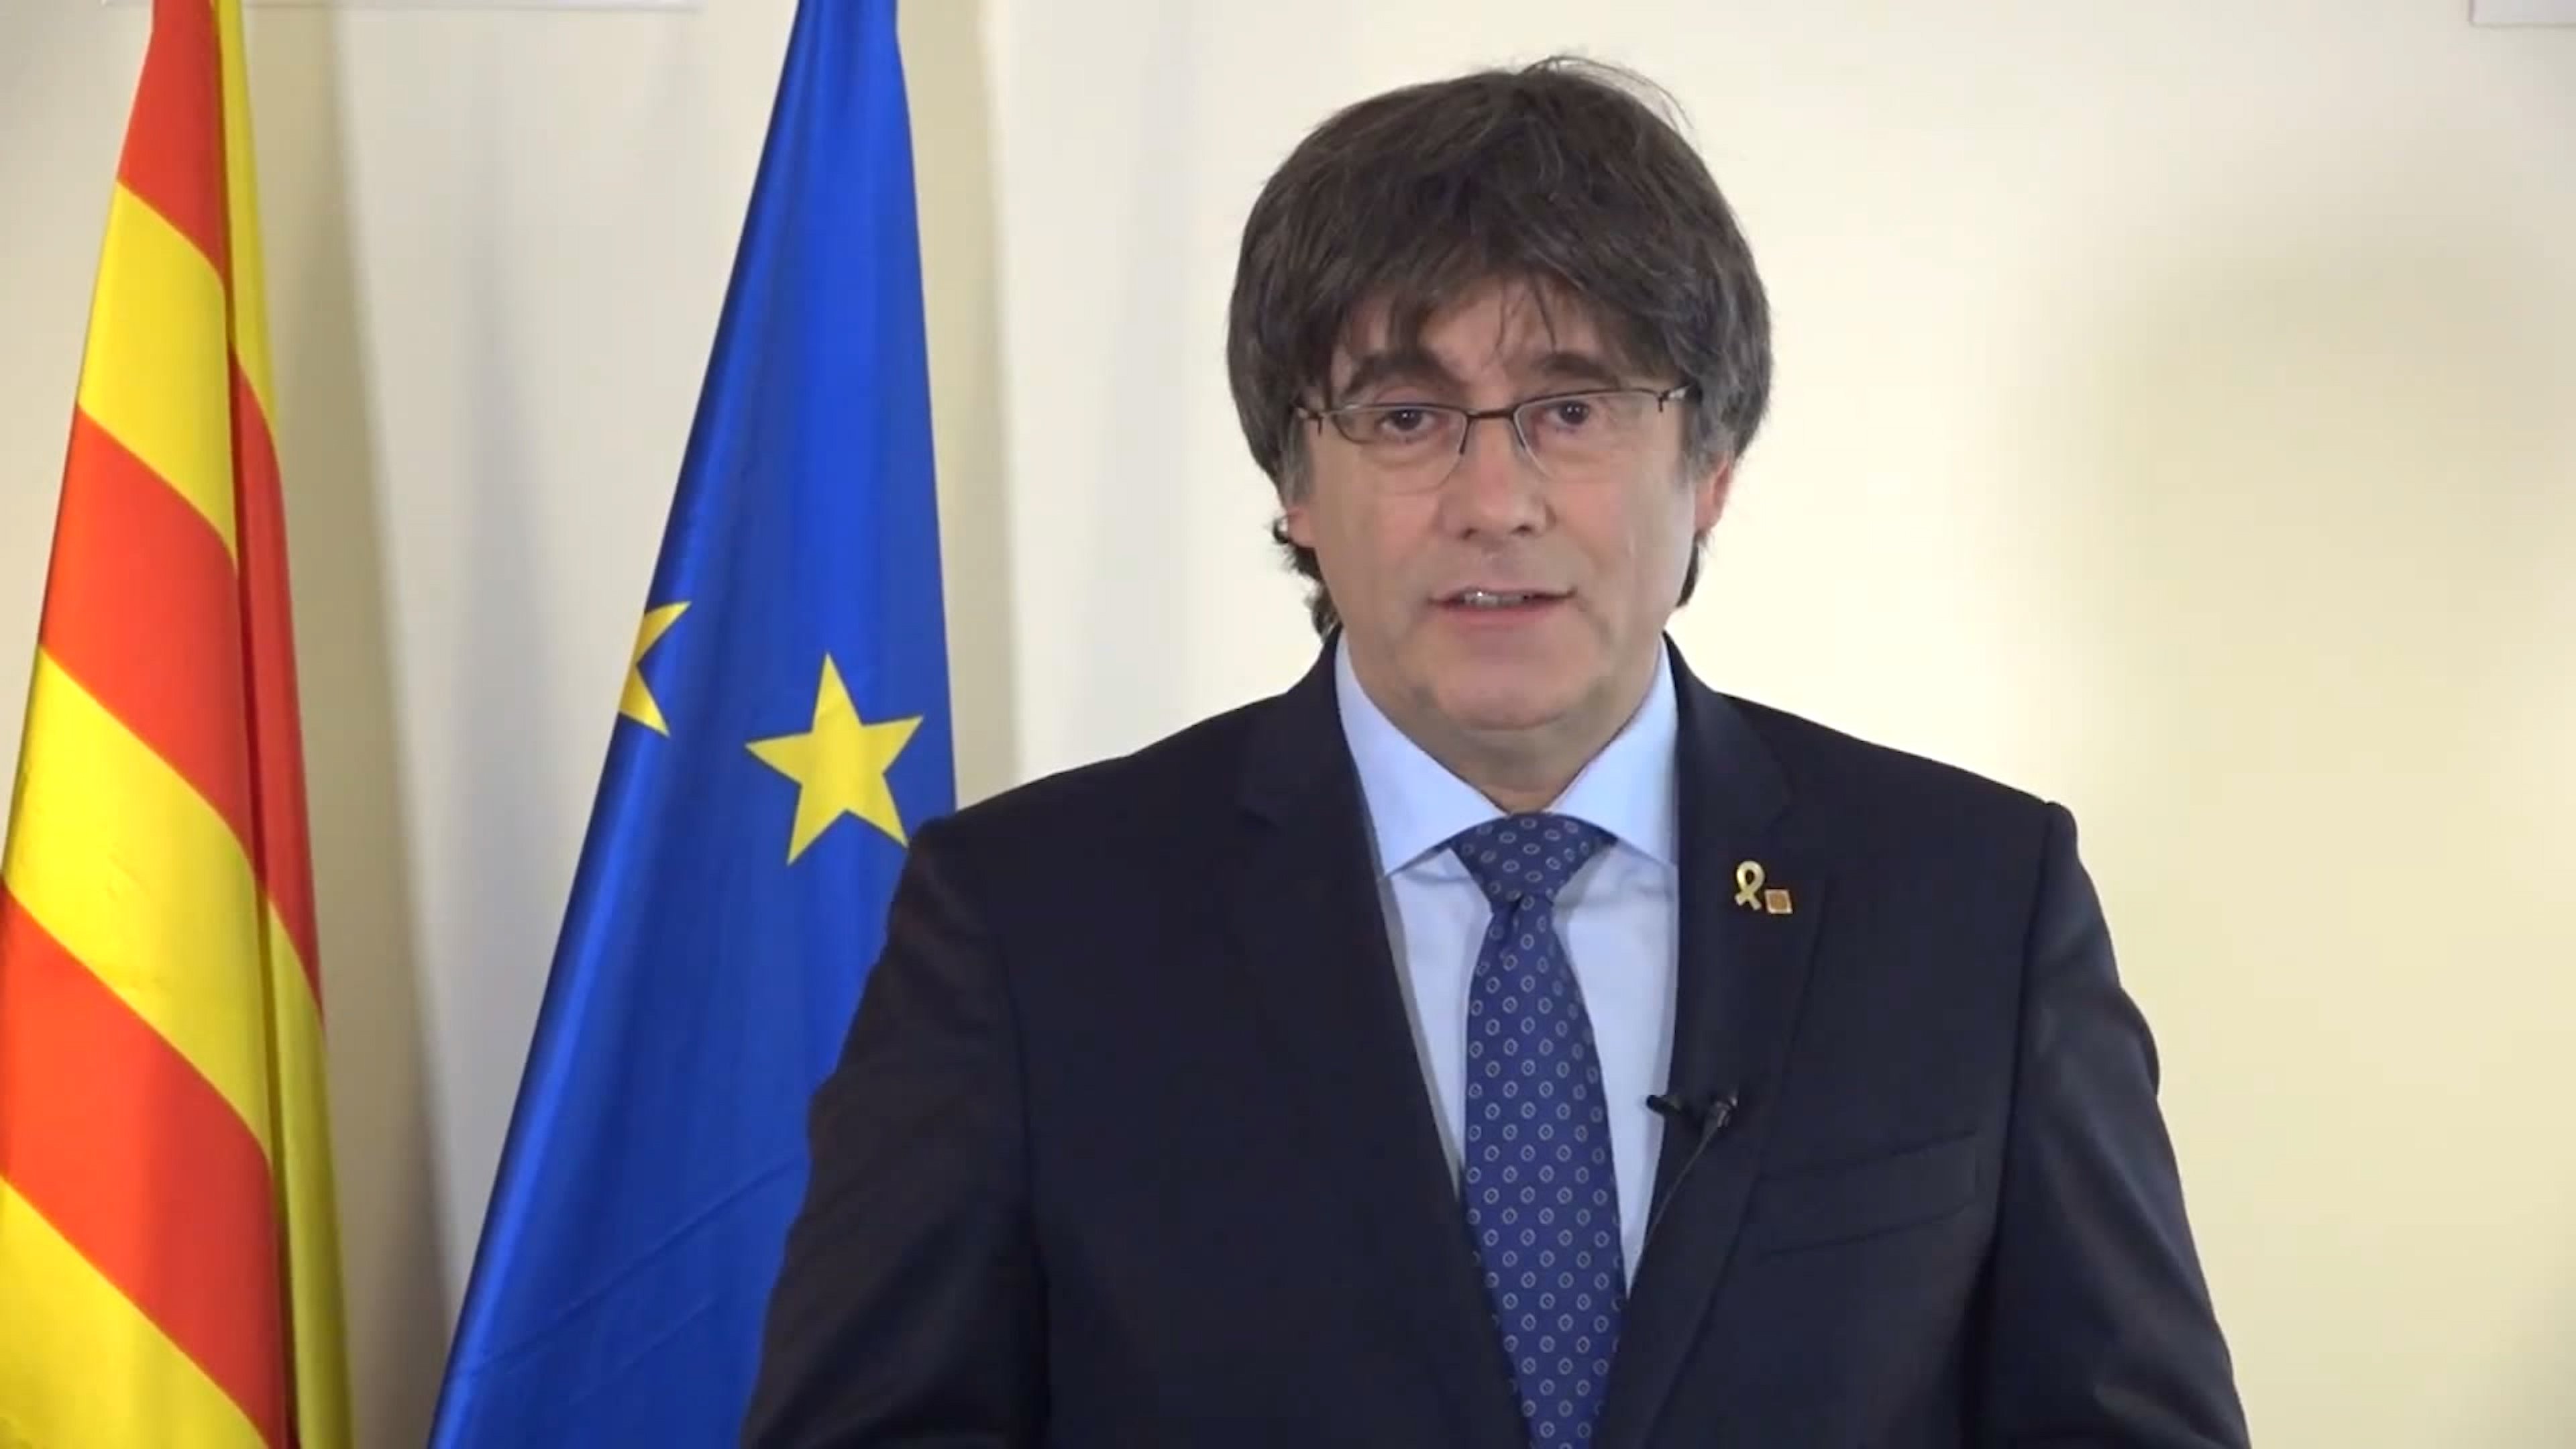 Puigdemont: "Do you want to kidnap me, Mr Pedro Sánchez?"